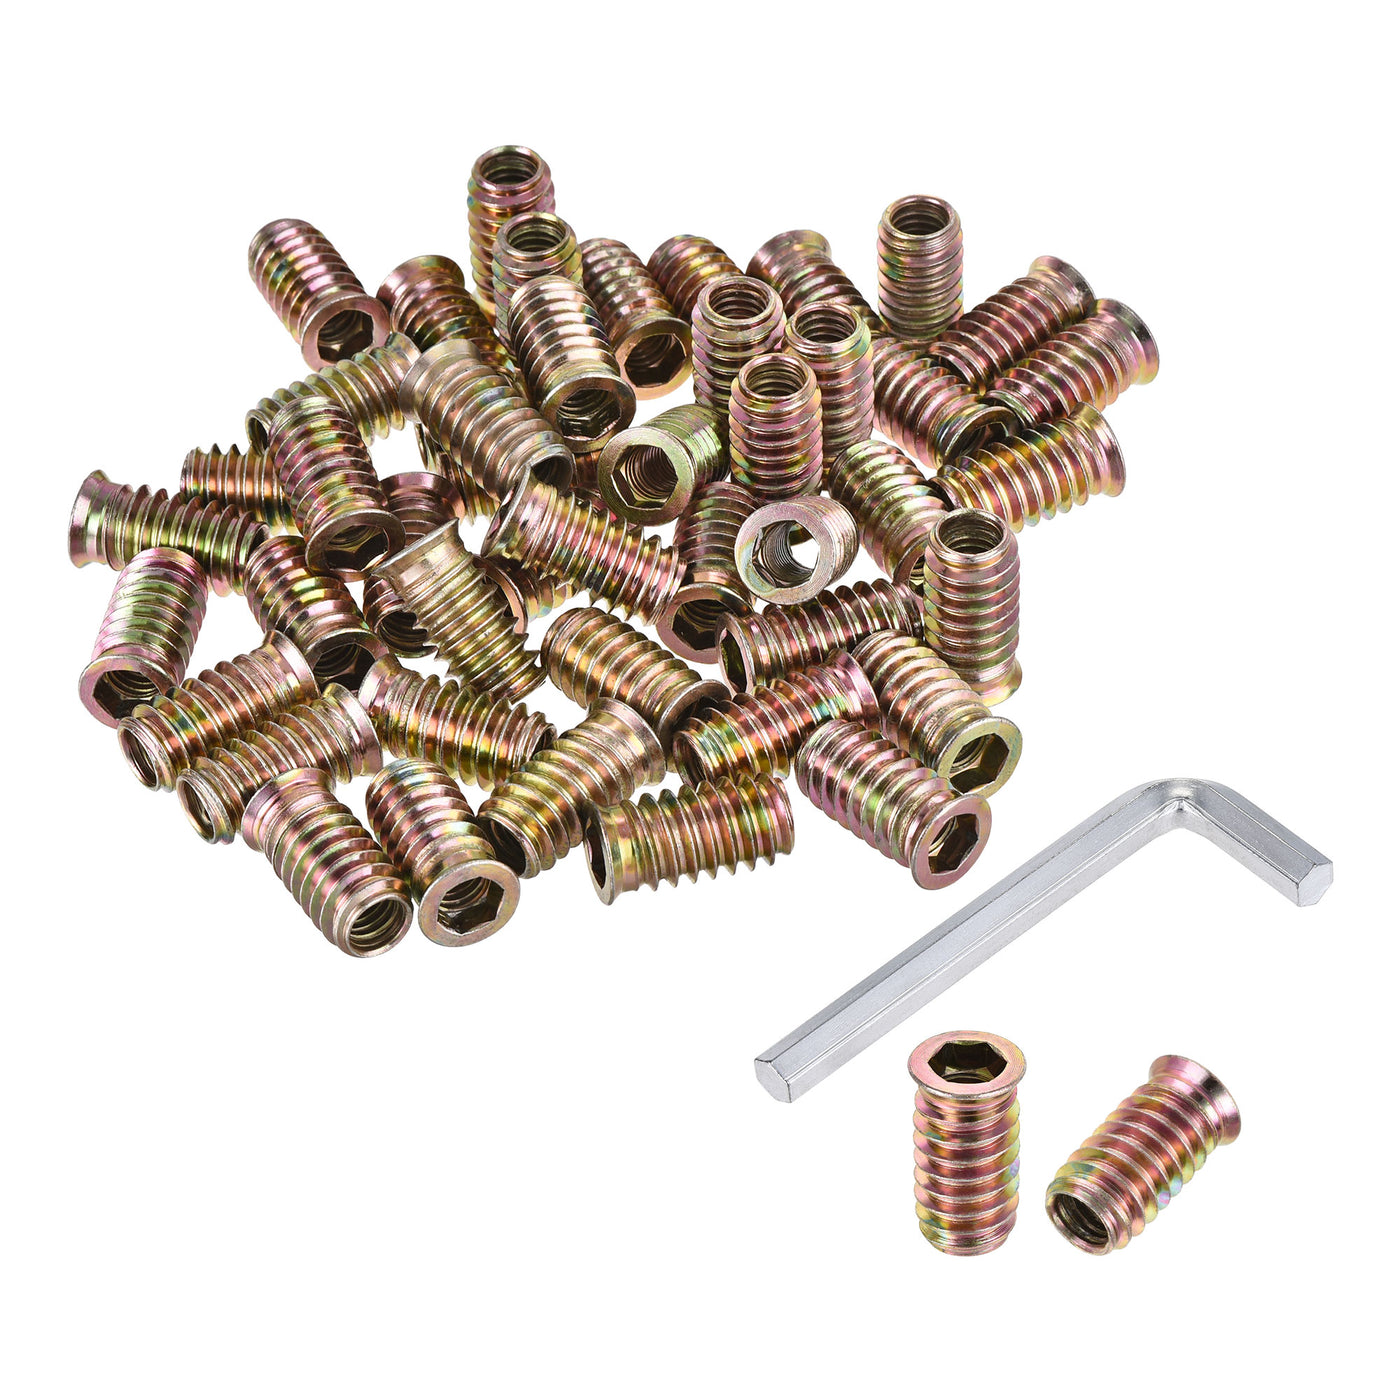 uxcell Uxcell 5/16"-18x25mm Threaded Insert Nuts Hex Socket Drive for Wood Furniture, with Wrench 50pcs